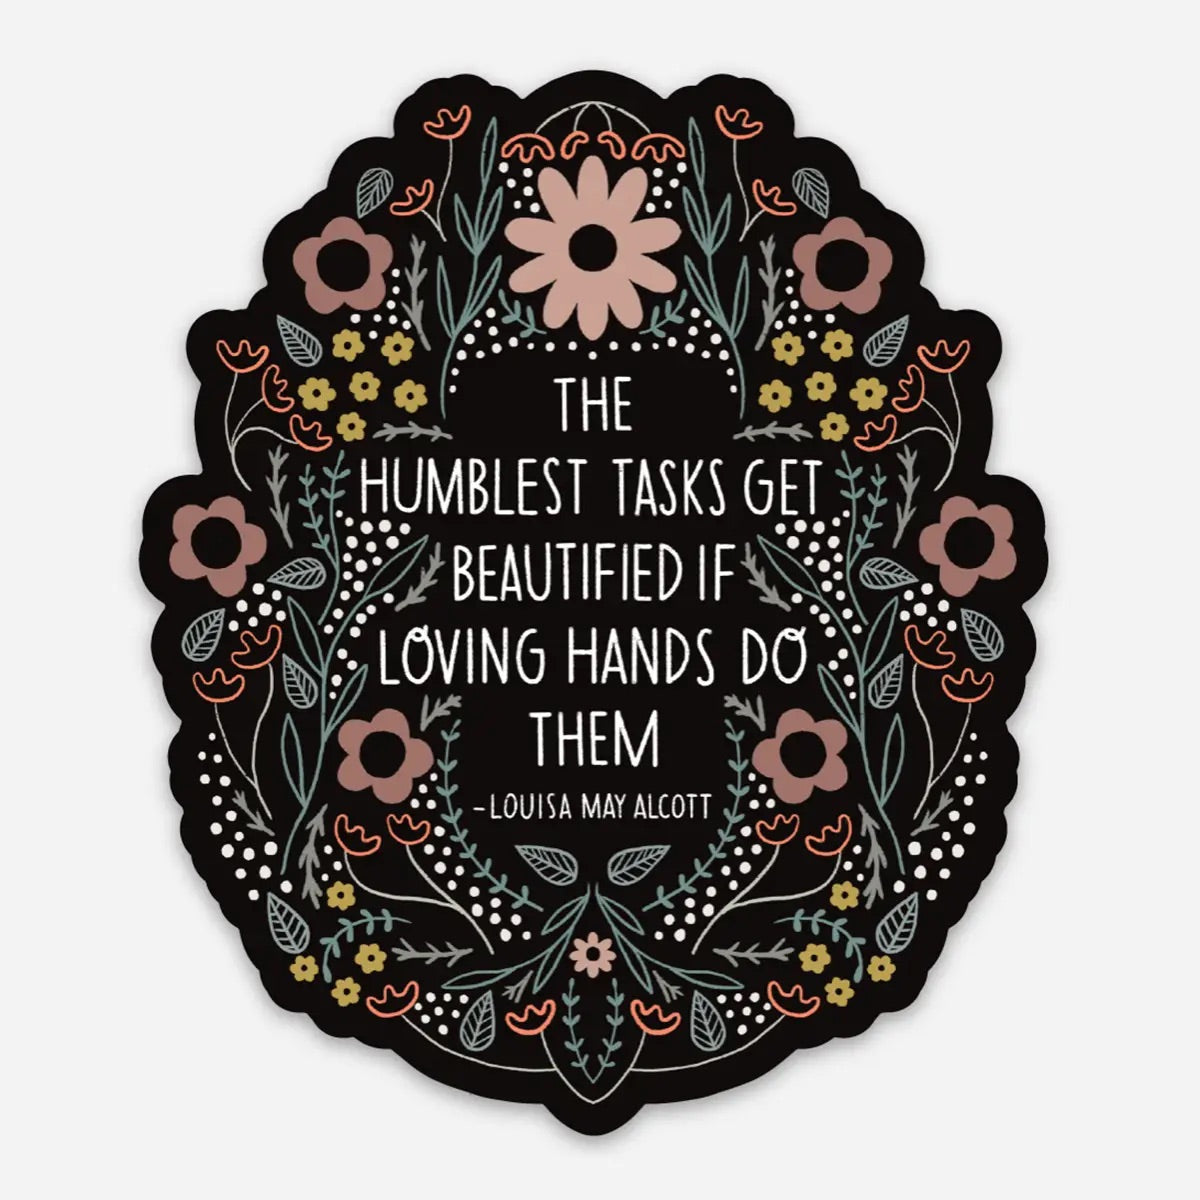 Black sticker with flowers. White text reads "the humblest takes get beautified if loving hands do them -Louisa May Alcott"